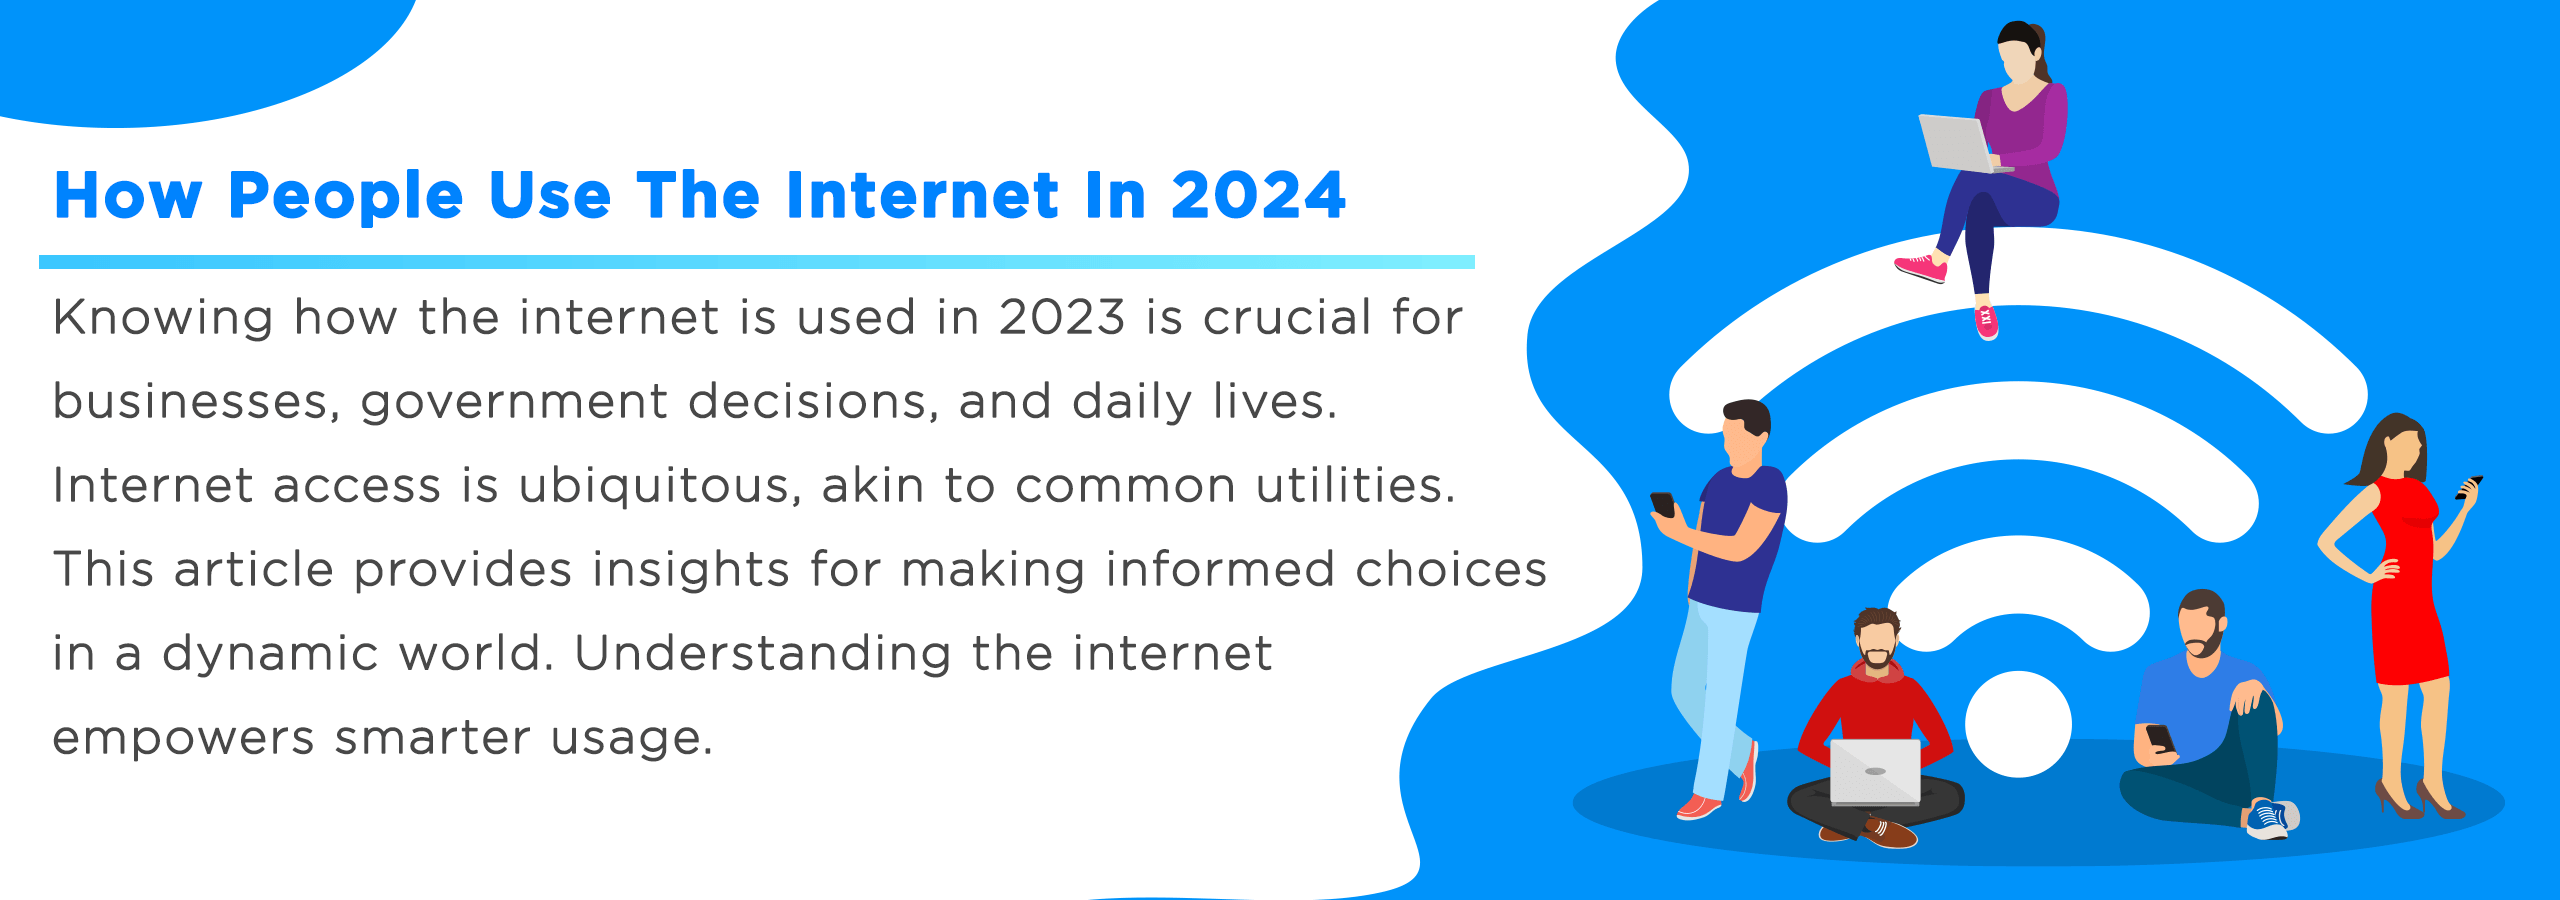 How People Use The Internet In 2024